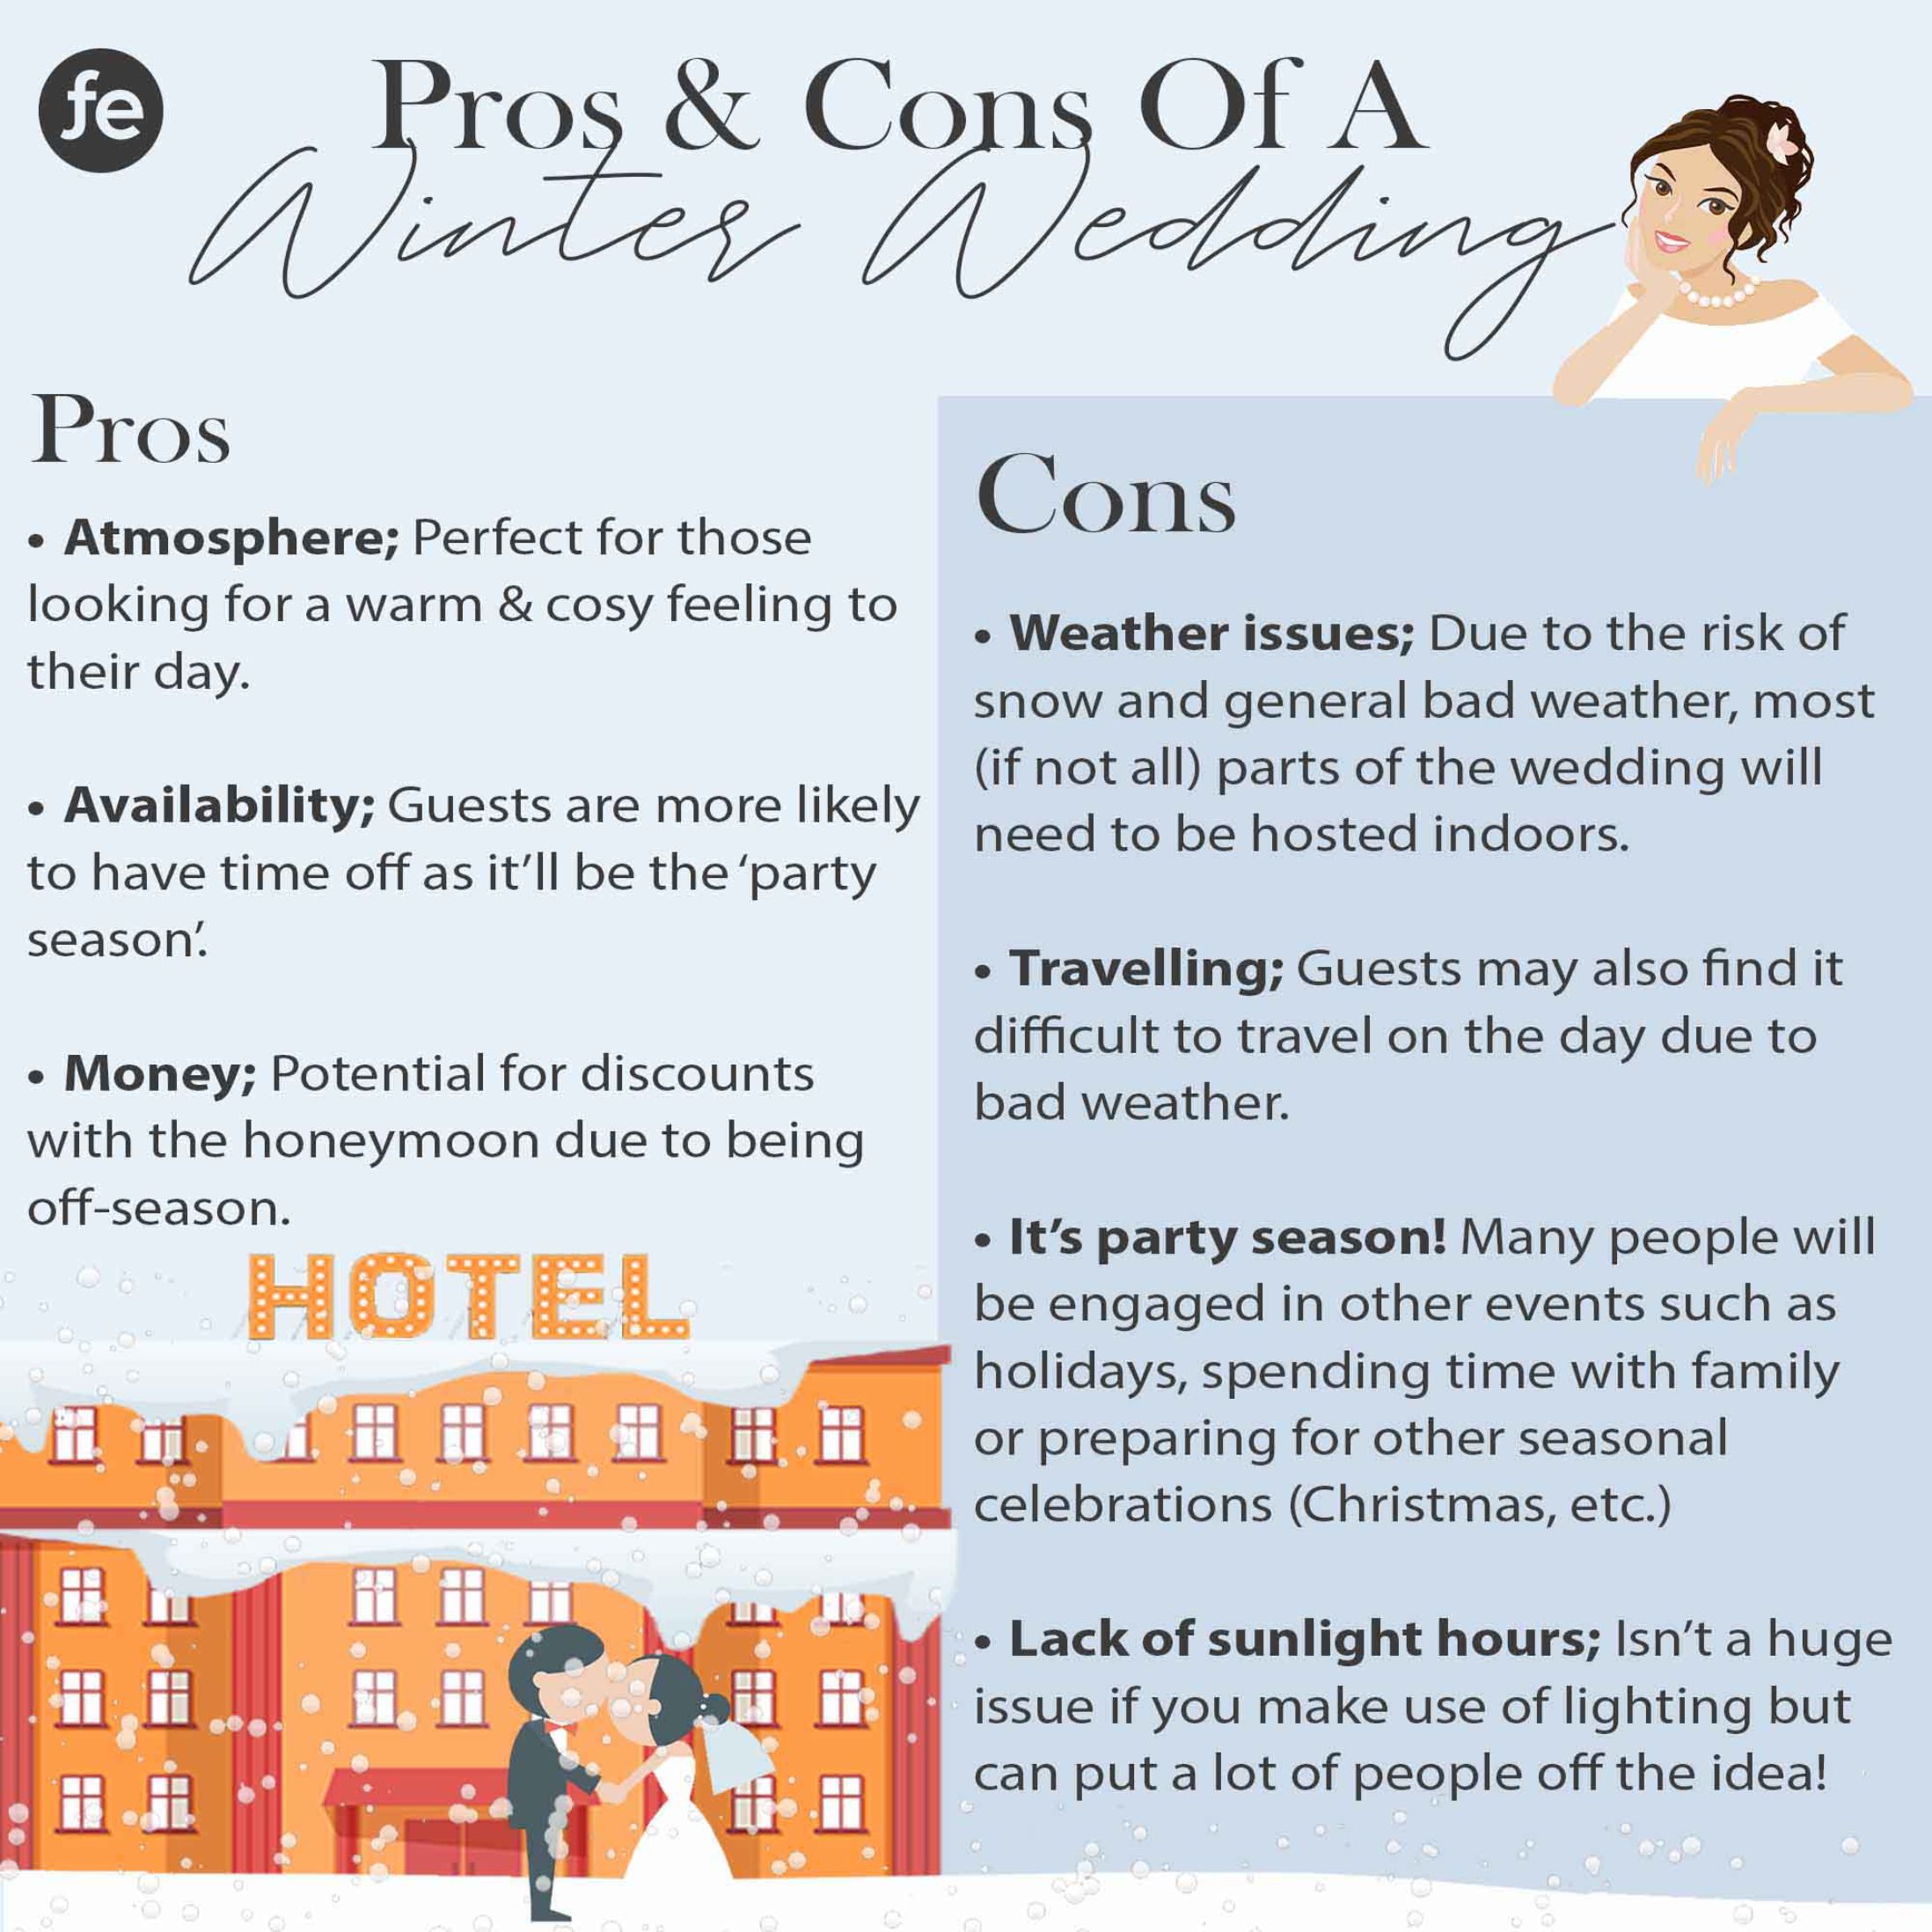 Winter Wedding Guide - Pros and Cons of A Winter Wedding